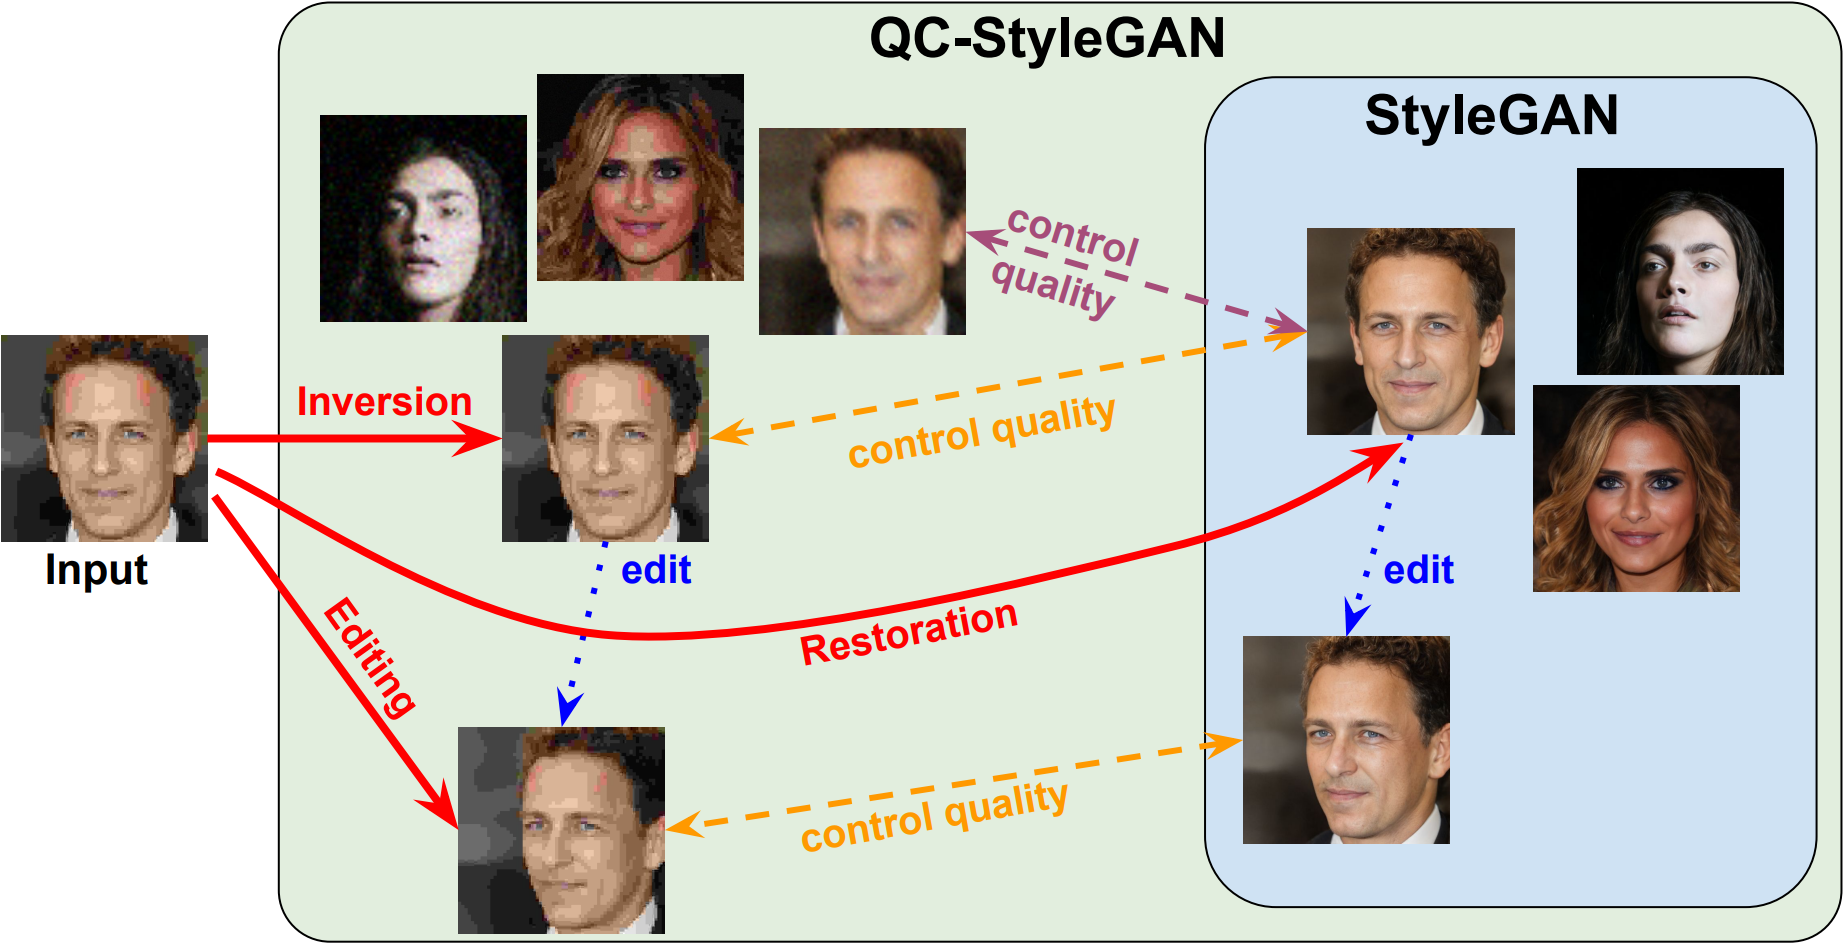 QC-StyleGAN – Quality Controllable Image Generation and Manipulation